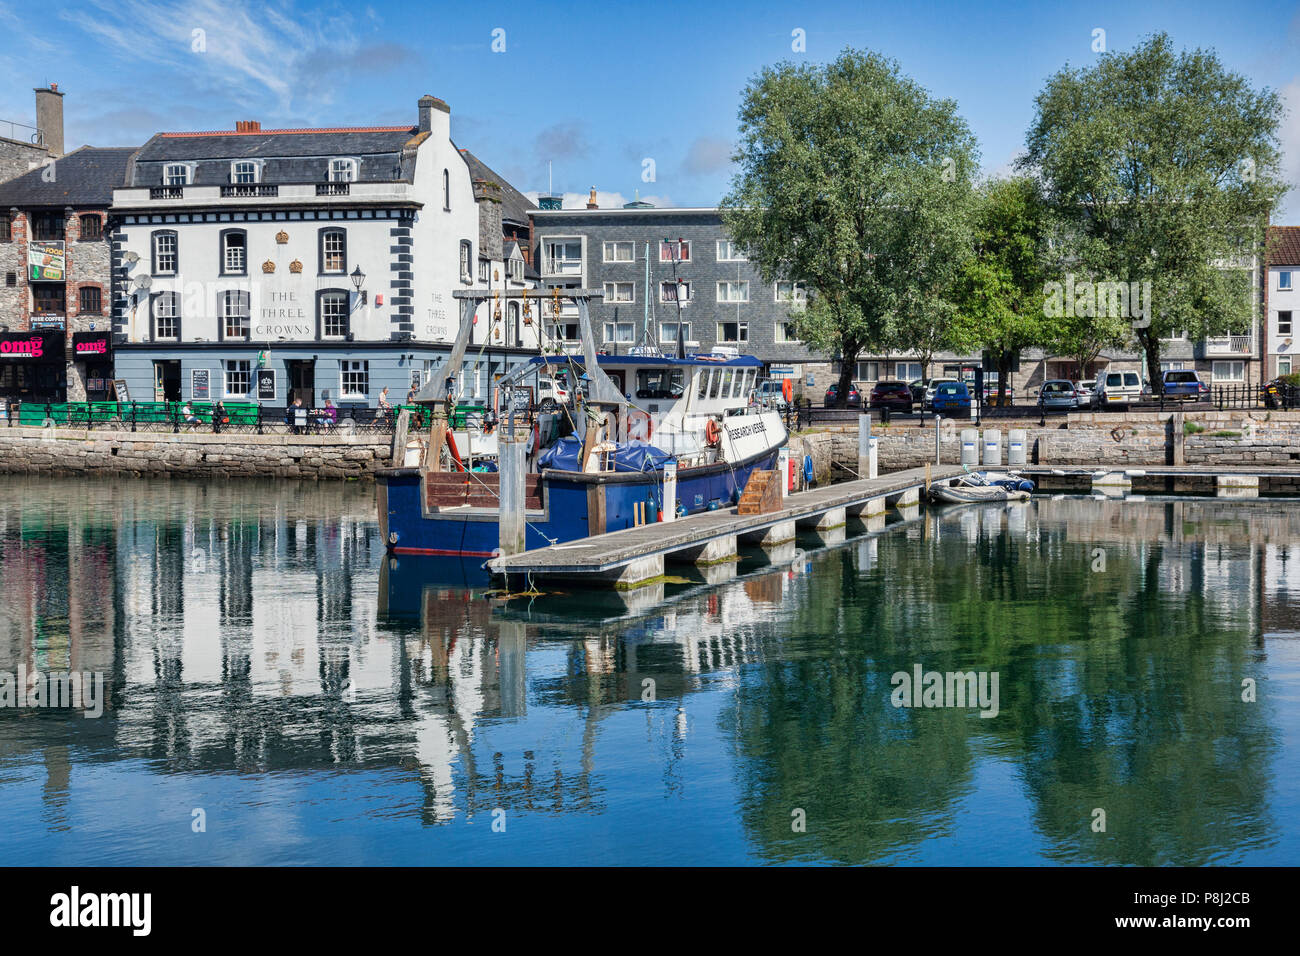 2 June 2018: Plymouth, Devon, UK - The Barbican with The Three Crowns public house reflecting in the water. Stock Photo